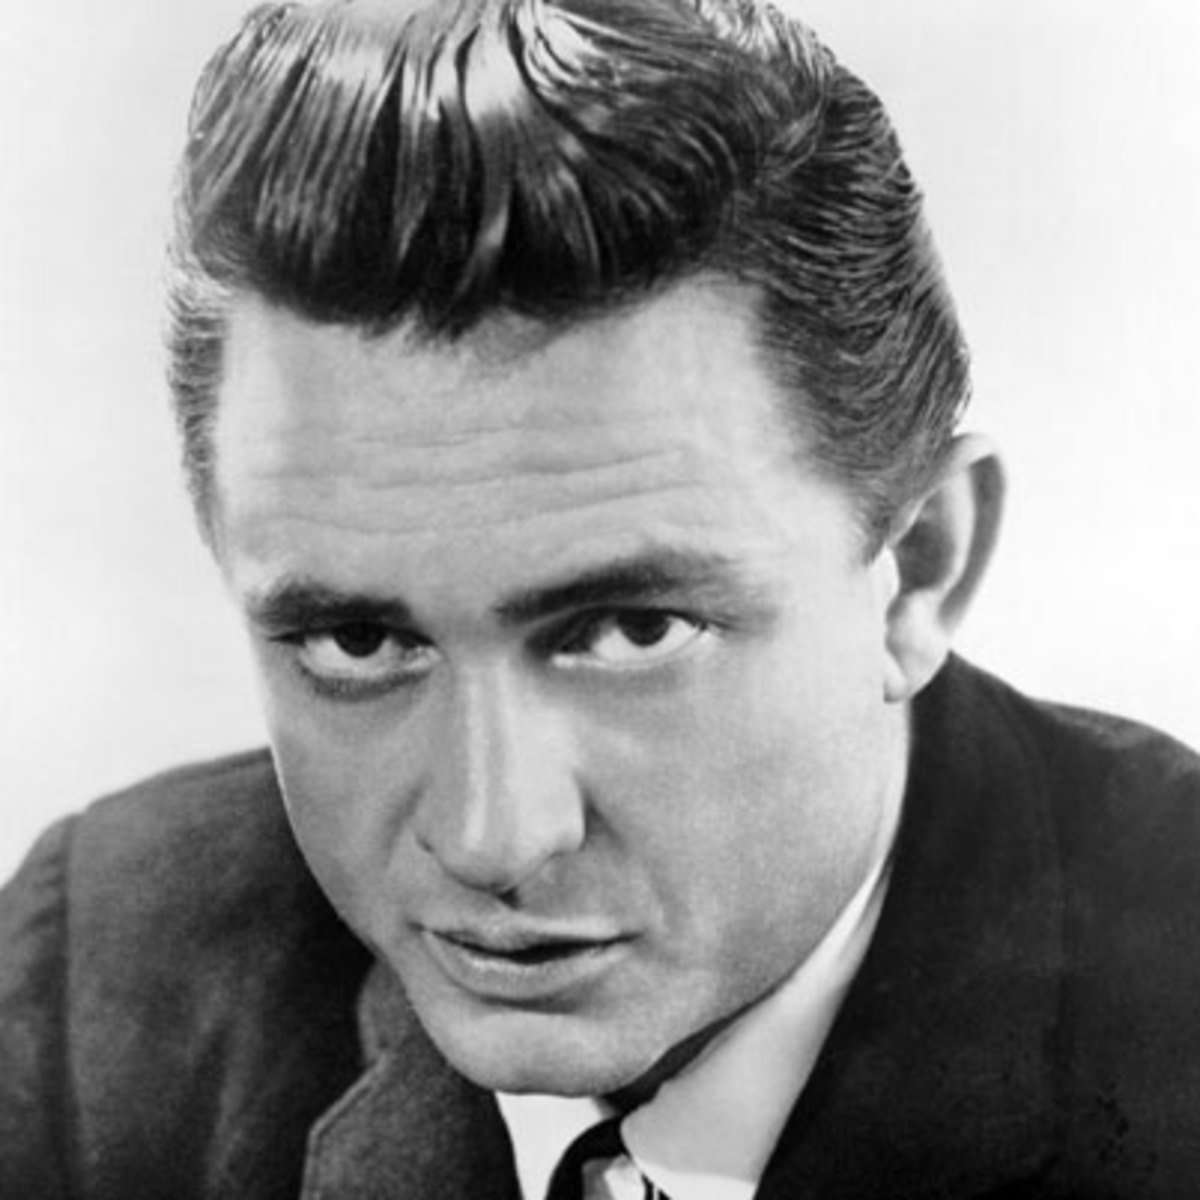 image for TIL Johnny Cash took only three voice lessons in his childhood before his teacher, enthralled with Cash's unique singing style, advised him to stop taking lessons and to never deviate from his natural voice.